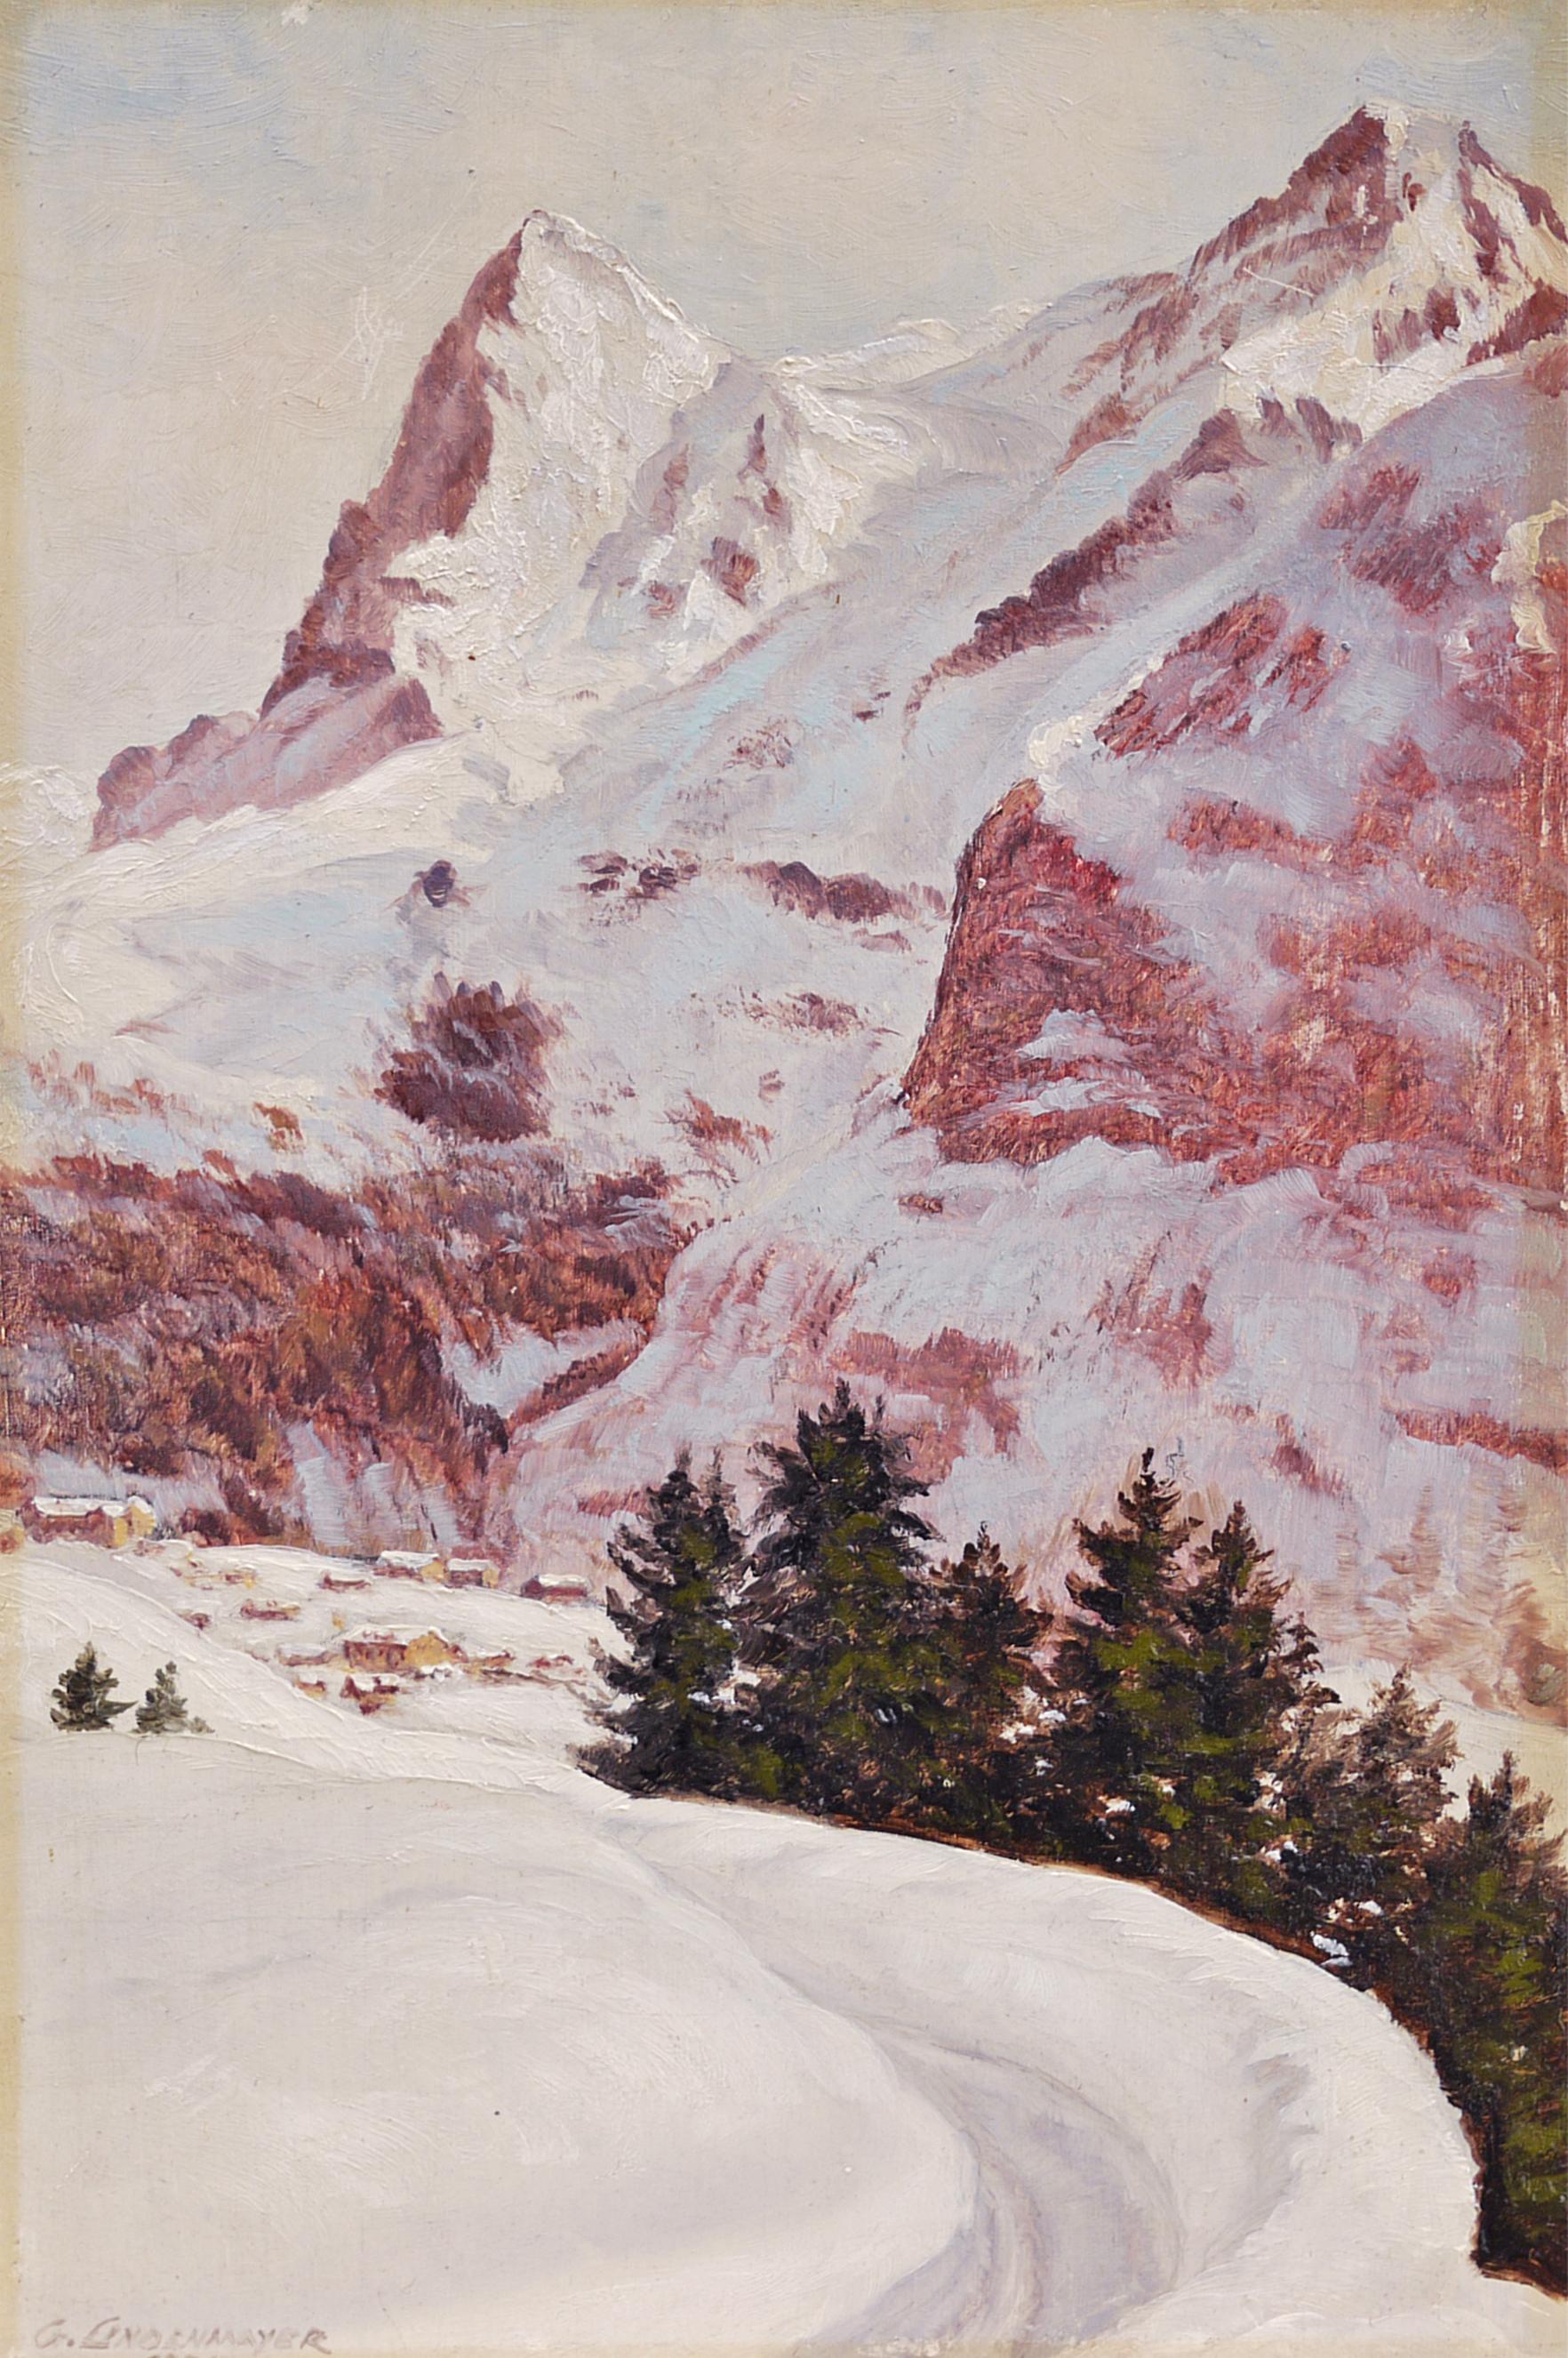 Snowy landscape – G. Lindenmayer

33 x 21 cm (dimensions referring to the canvas only) – oil on table, 1950s

Available with the original silver frame or with the antique fir wood frame.